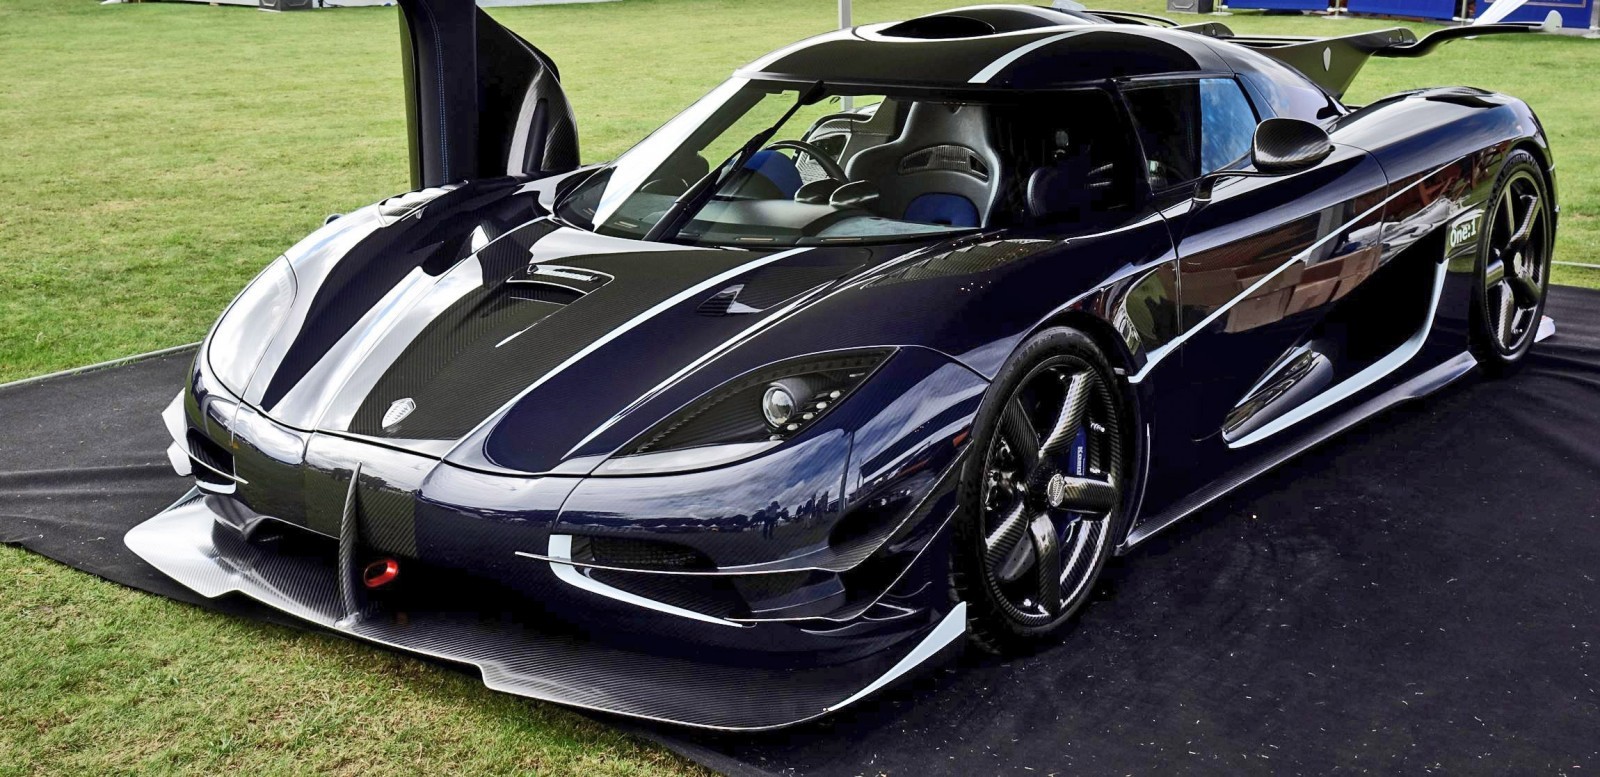 SALON PRIVE 2015 Mega Gallery - Part Two in 168 New Photos